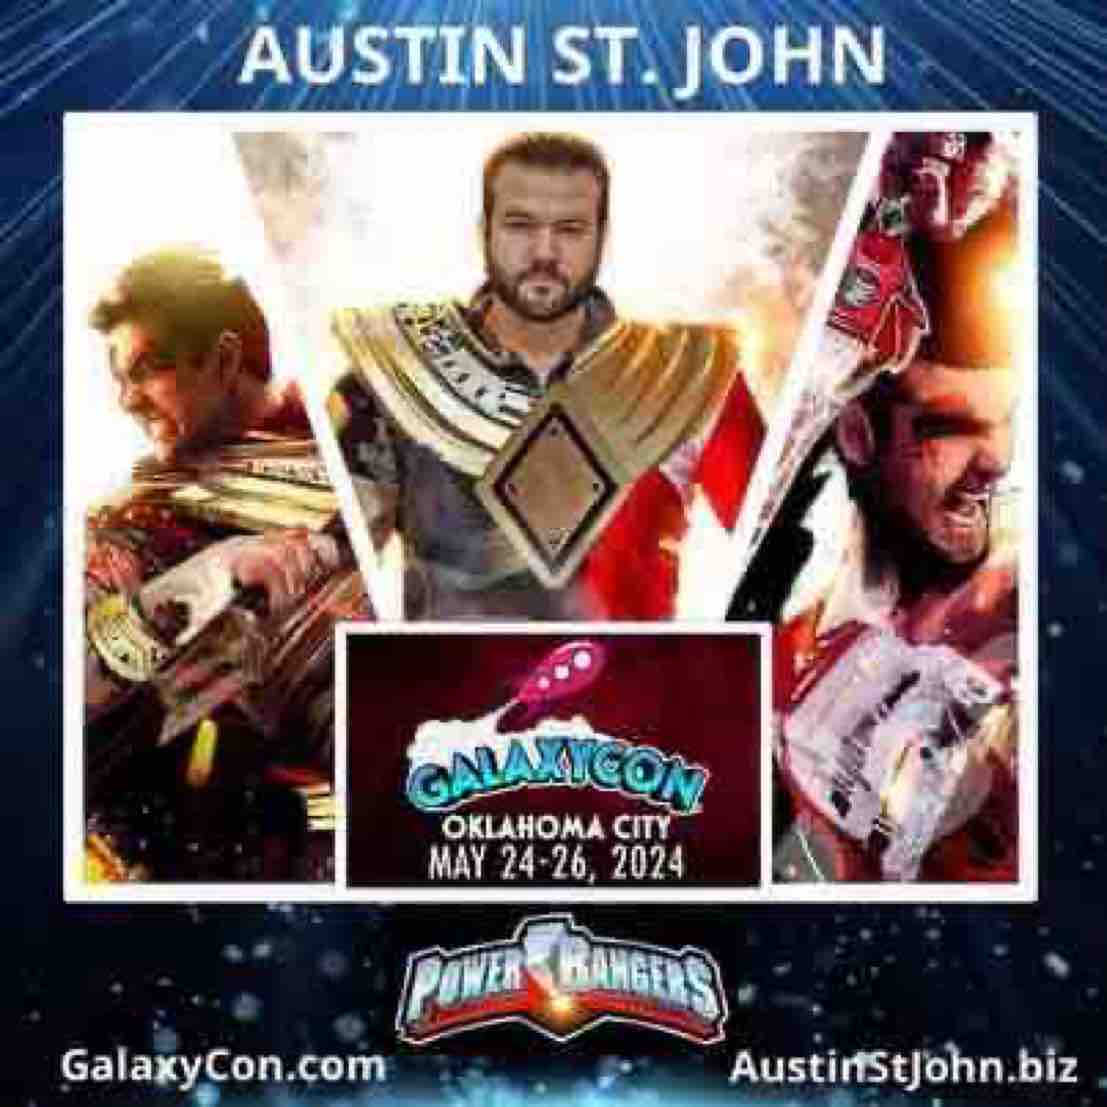 It’s Back to Action at GalaxyCon OKC! It’s the final day yo get autographs, have questions answered, shake hands & take pictures! You can get more info & tickets at the link below. See YOU soon! austinstjohn.komi.io #powerrangers #mmpr #rangertoreaper #redempt1on